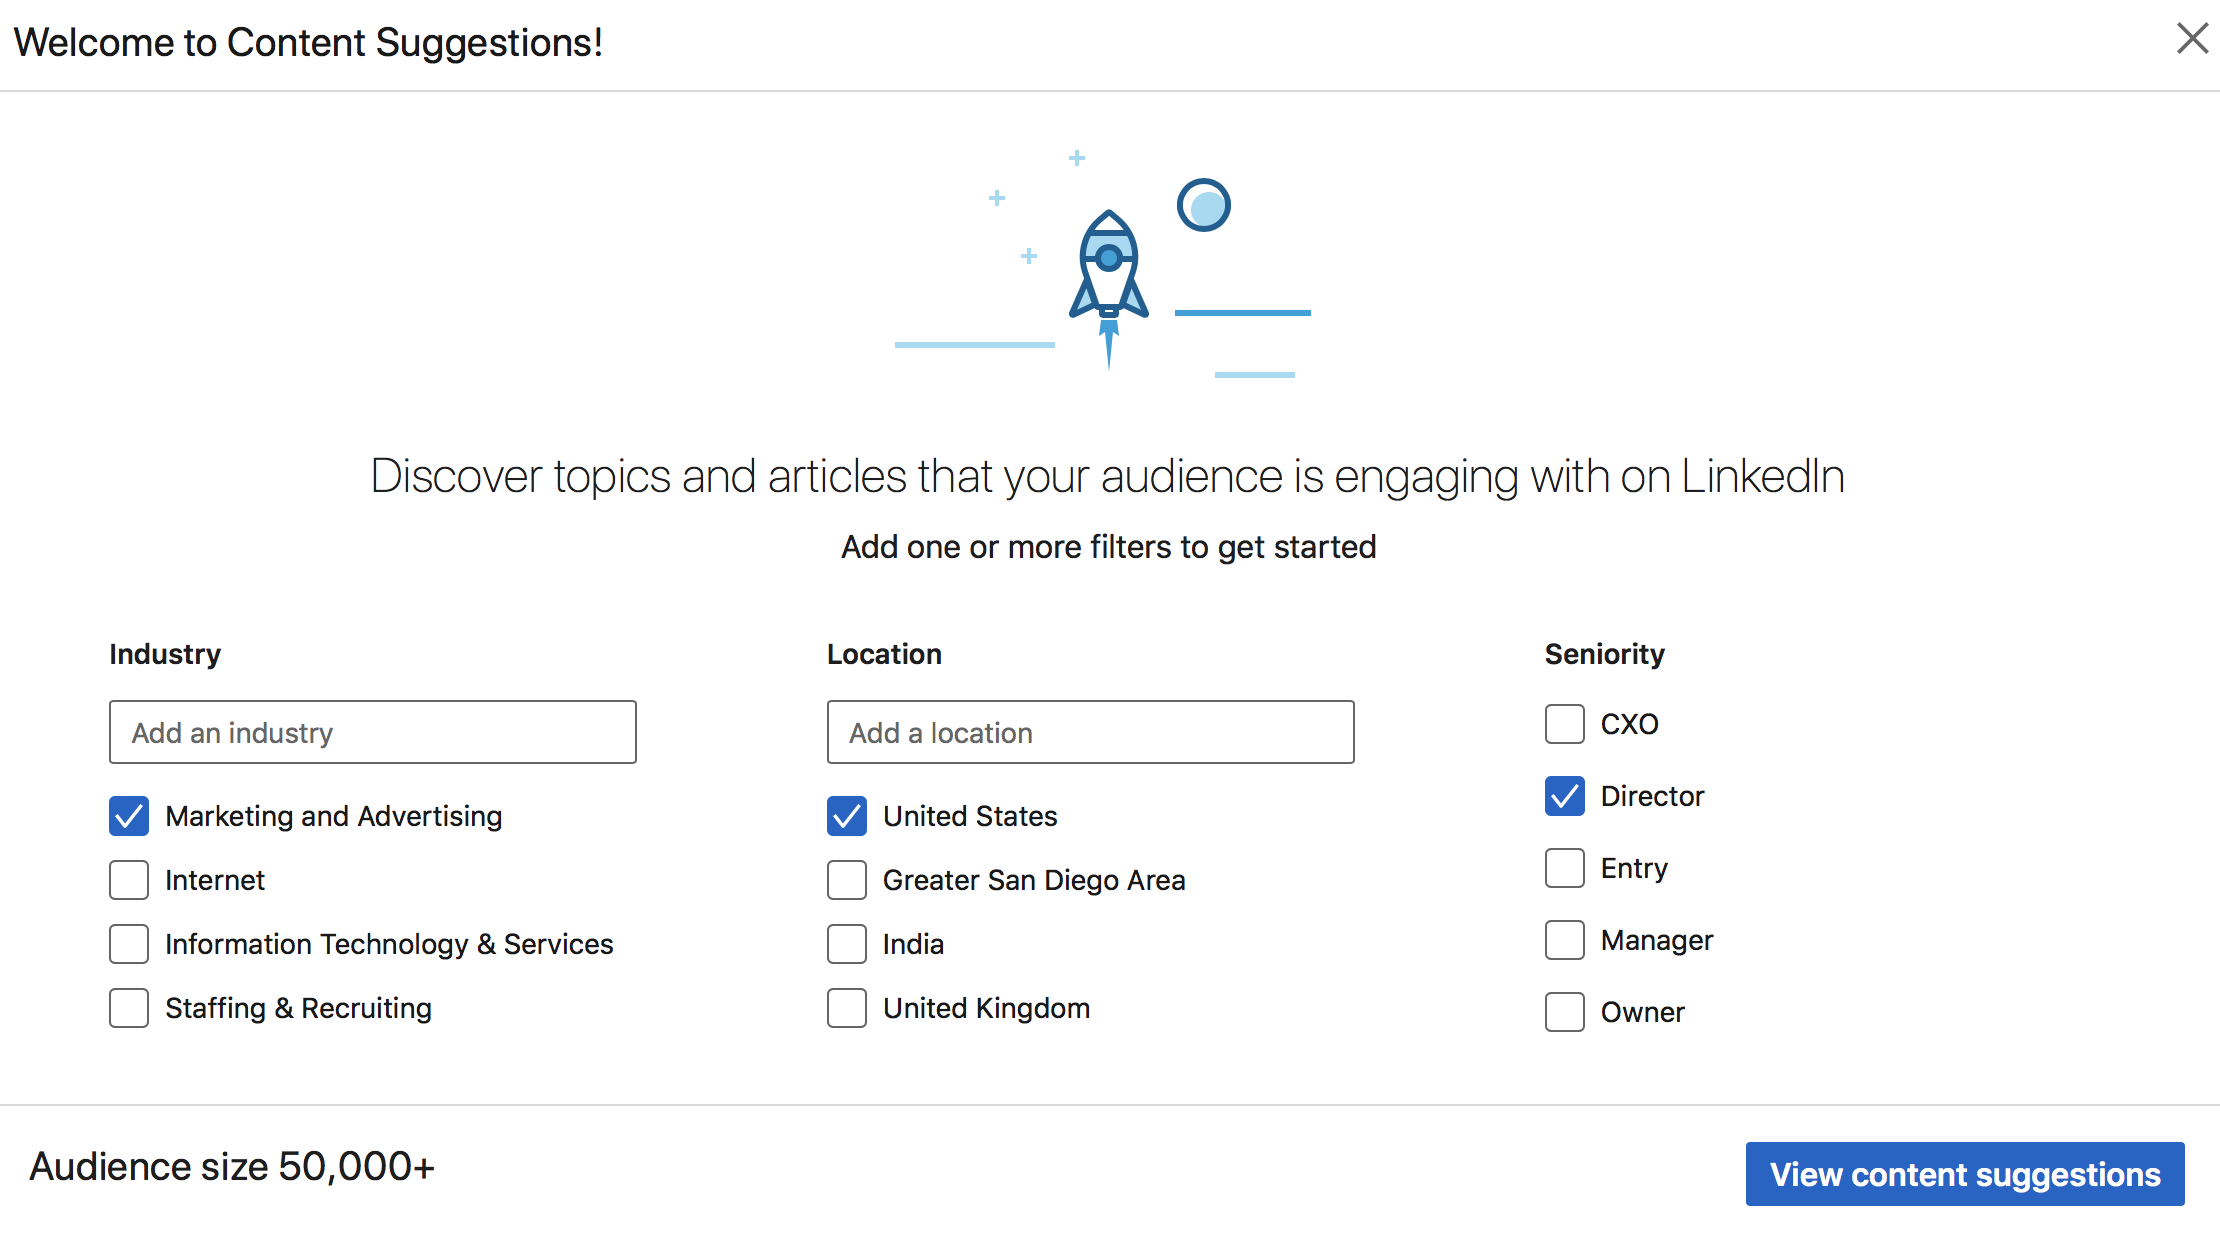 Use LinkedIn's Content Suggestions